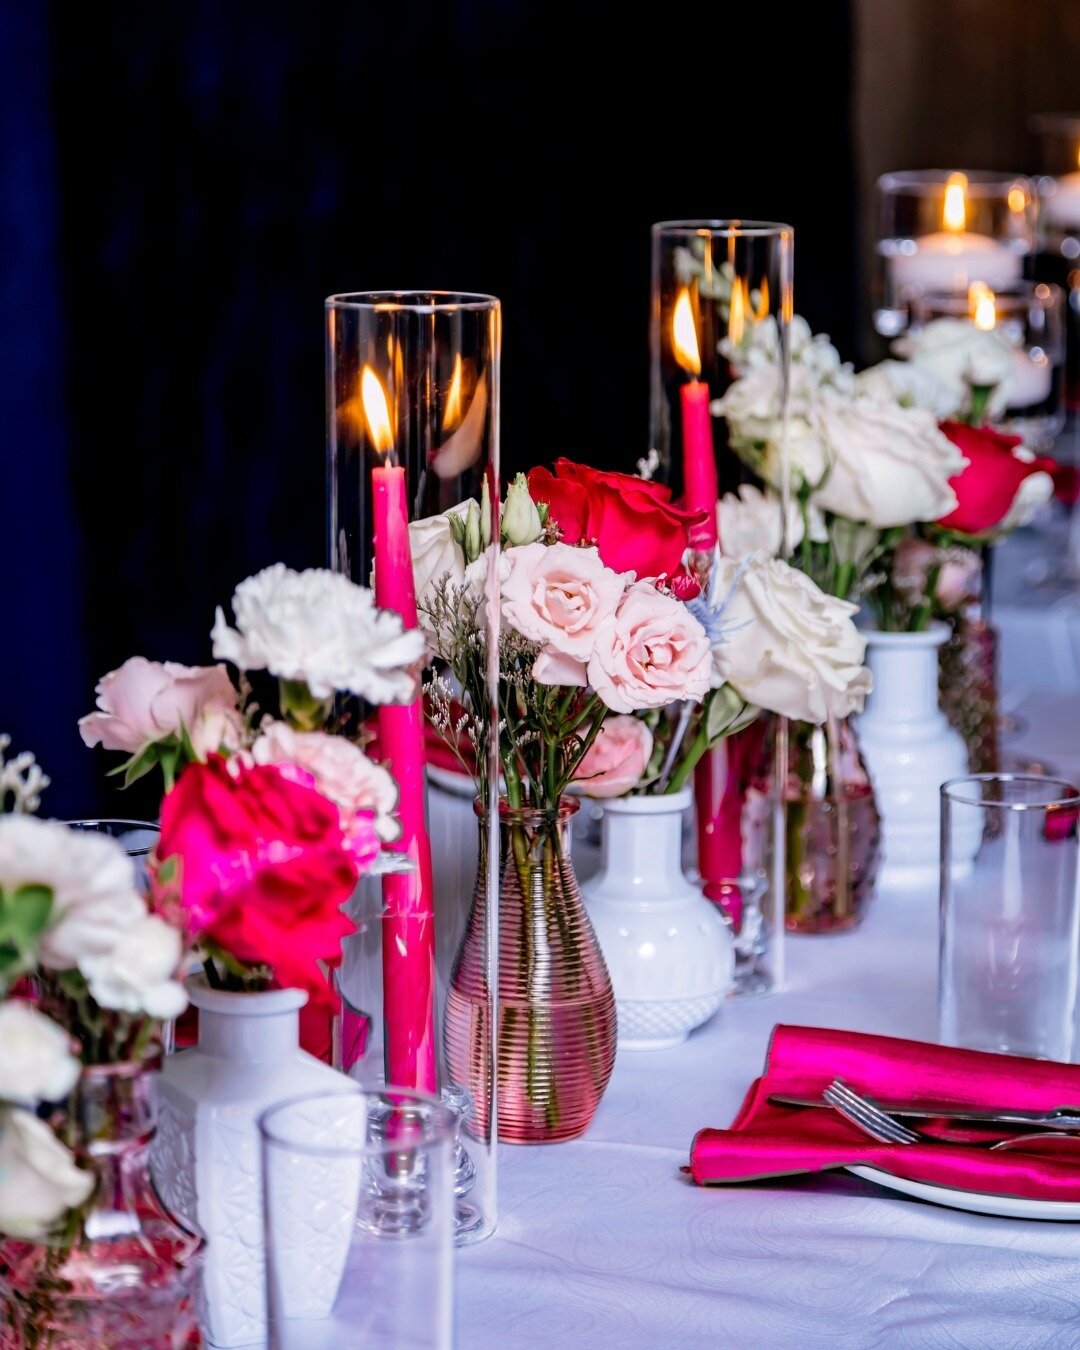 Love painted in the most beautiful hues, from vibrant blooms as part of the reception decor to the most visually appealing and beautifully plated dishes prepared by Founders Restaurant. This wedding was one bursting with joy, flavor, and endless shad